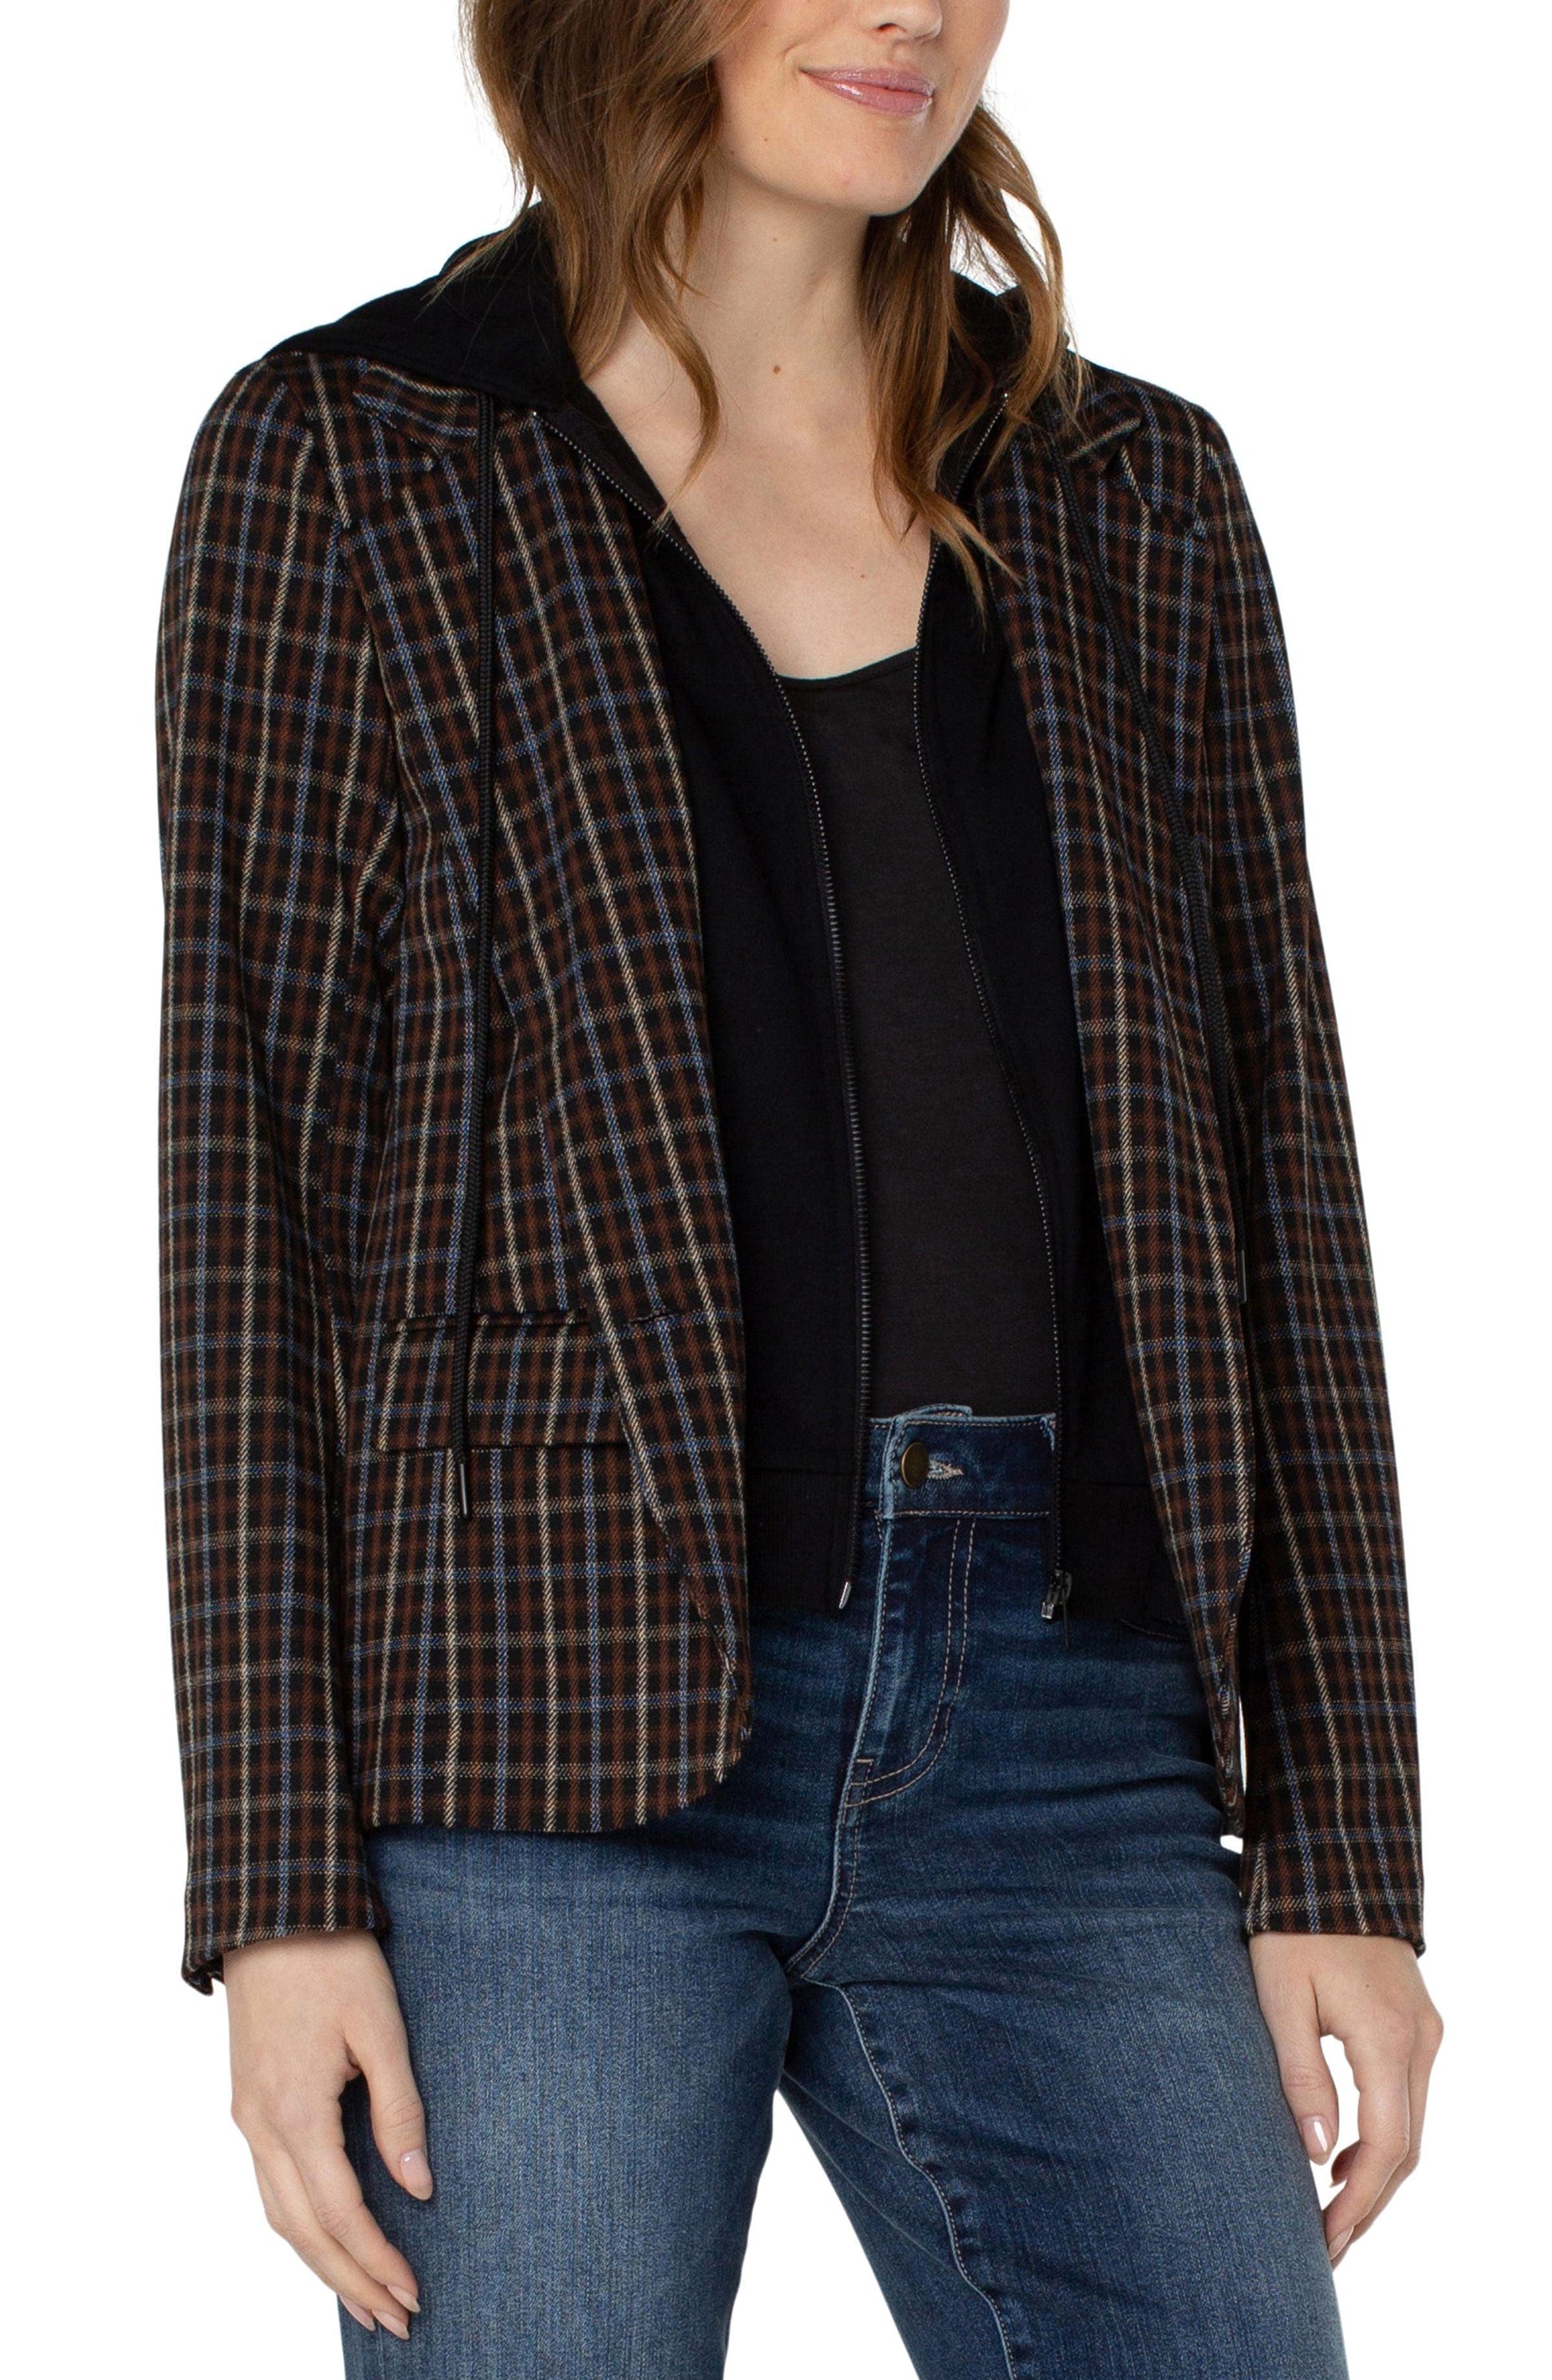 Liverpool Black Plaid Blazer with Removable Hood - Strawberry Moon Boutique